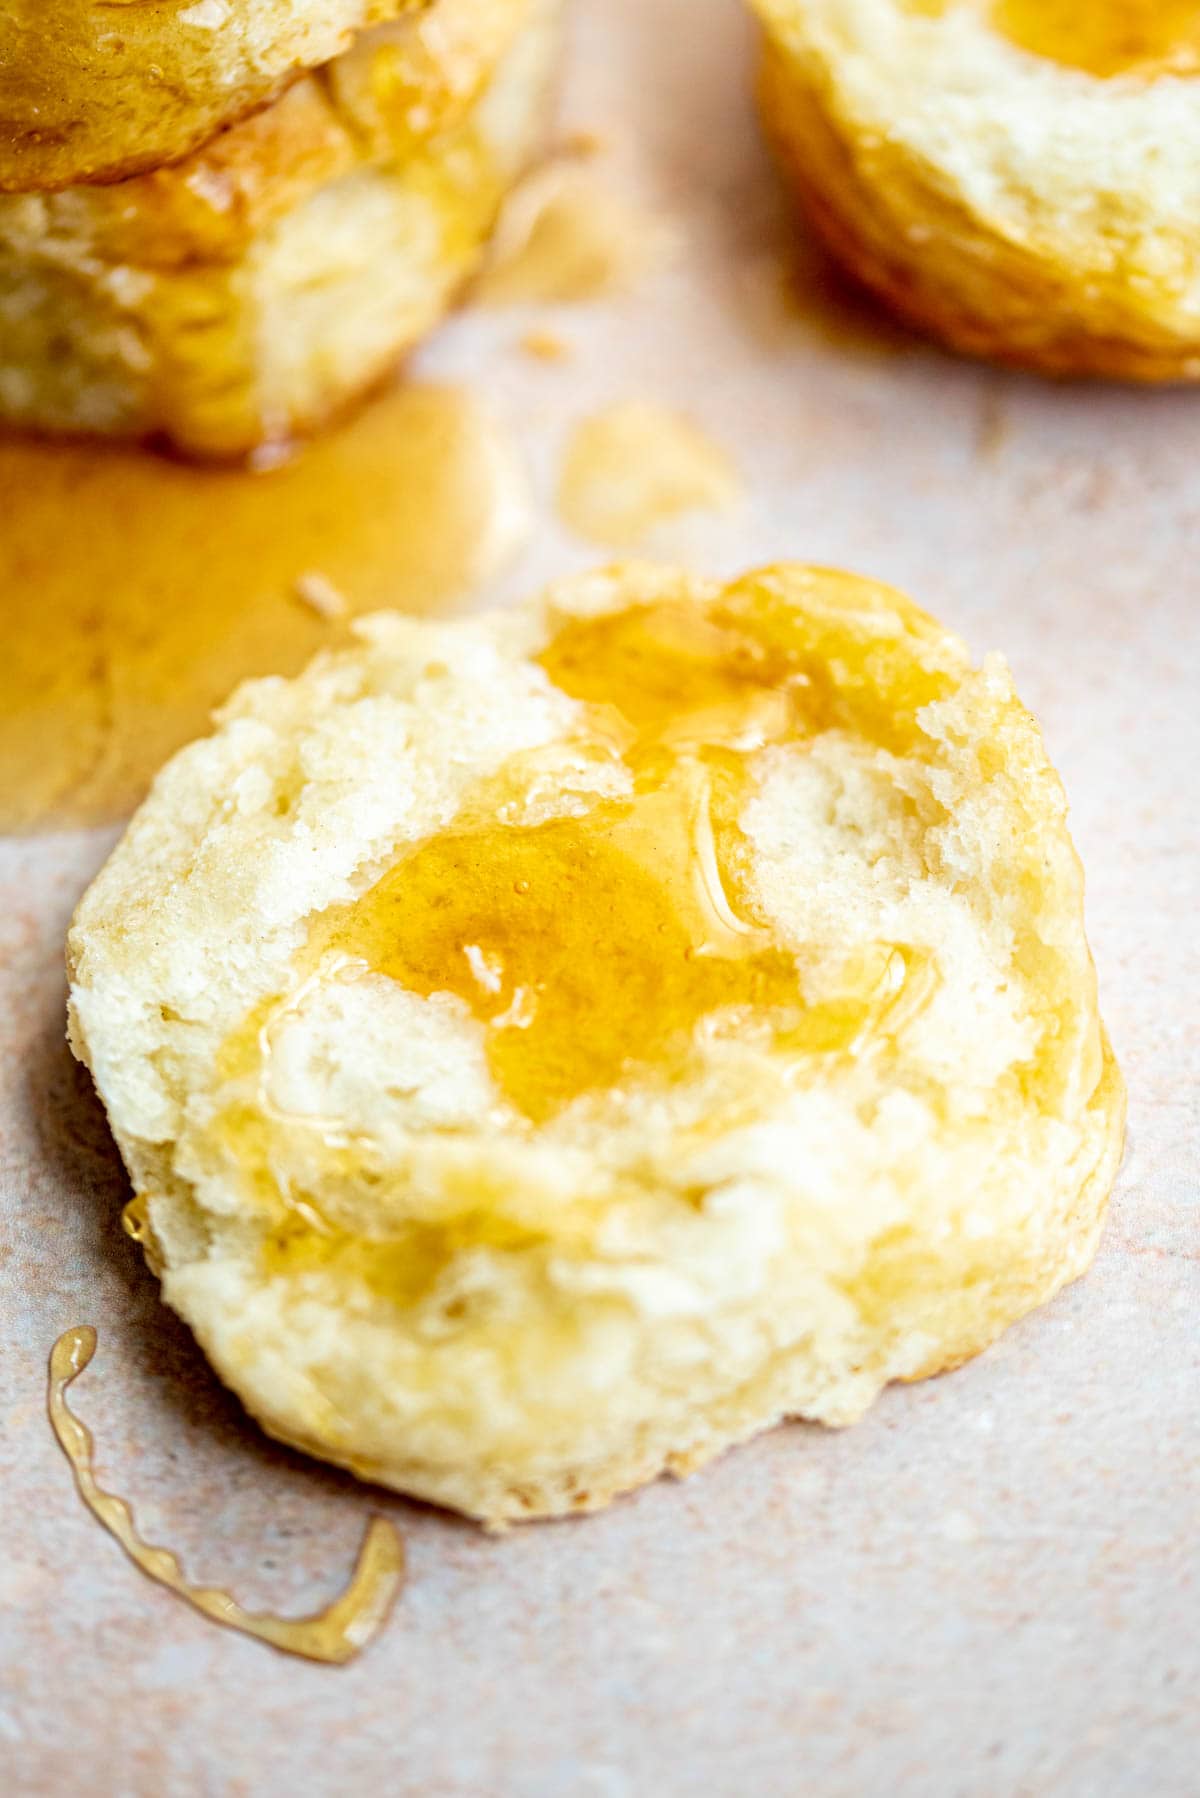 A biscuit split in half and drizzled with honey.